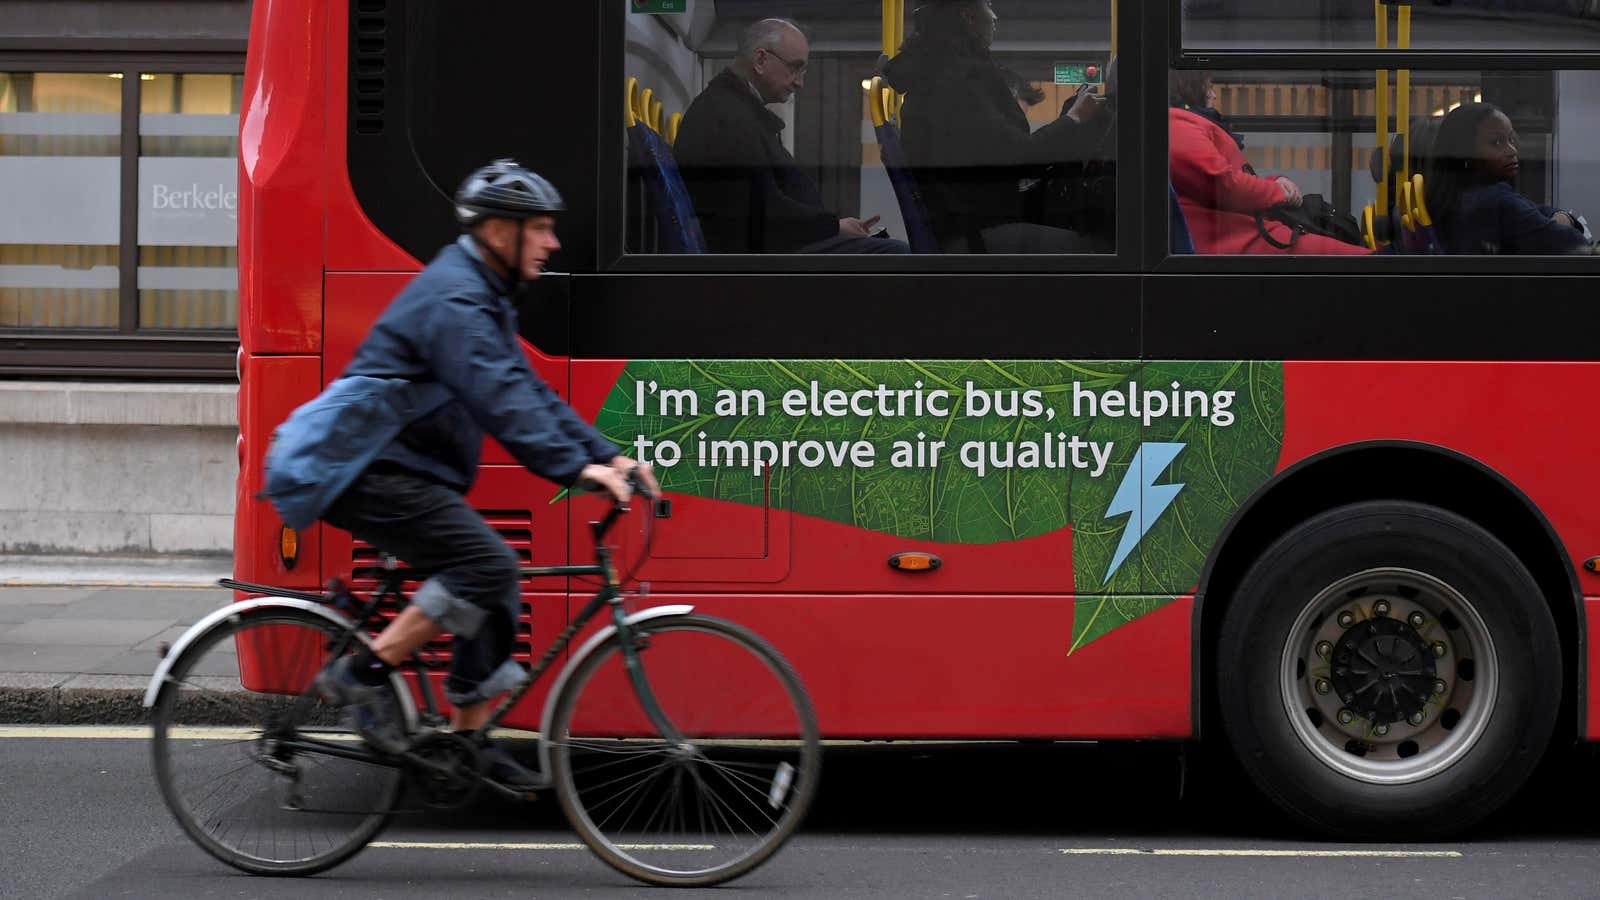 London has a goal for 80% of trips be made on foot, by cycle or using public transport by 2041